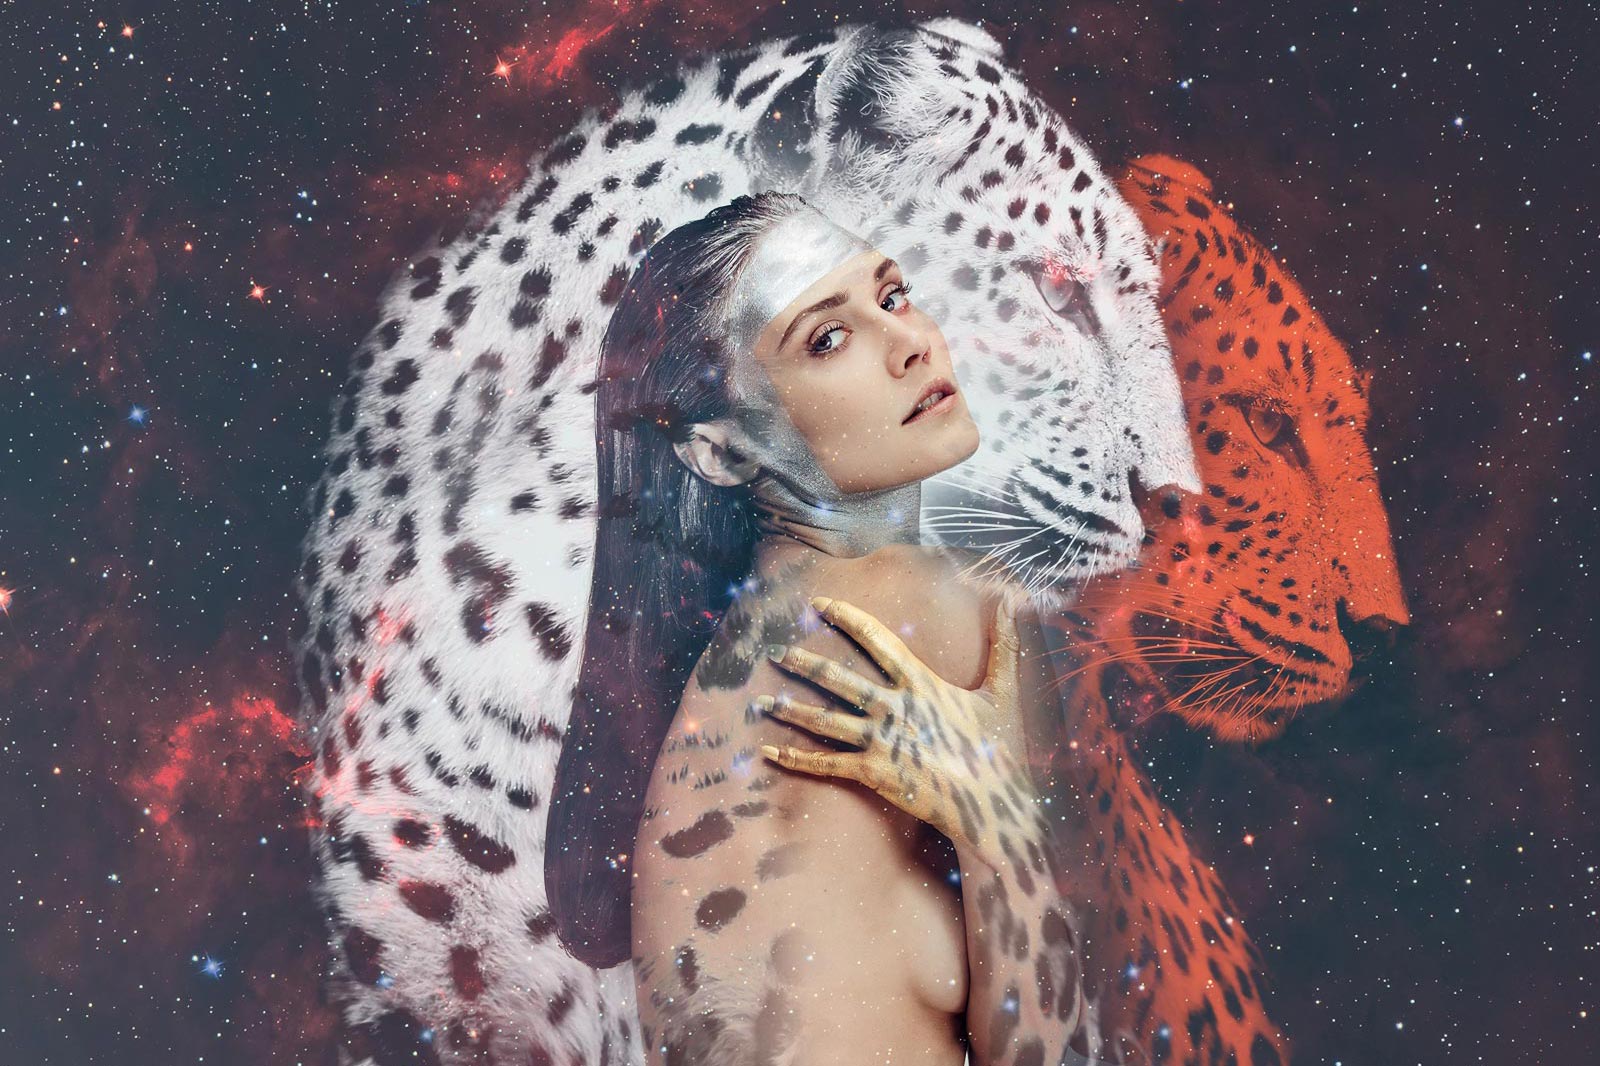 Woman against starry sky with Leopard spirit animal 